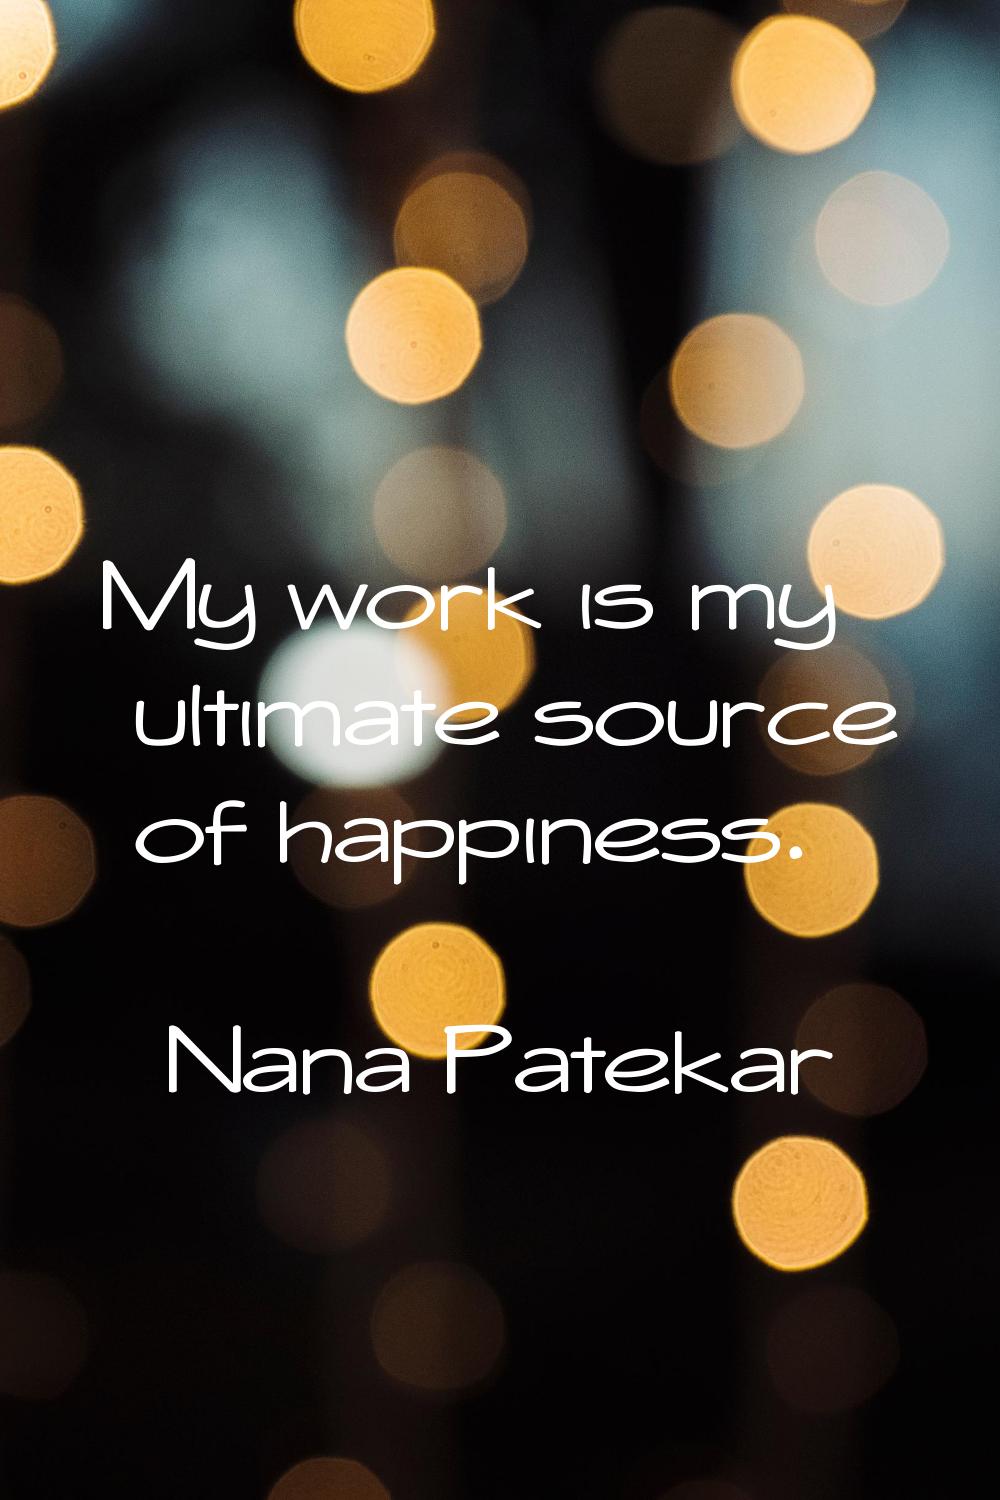 My work is my ultimate source of happiness.